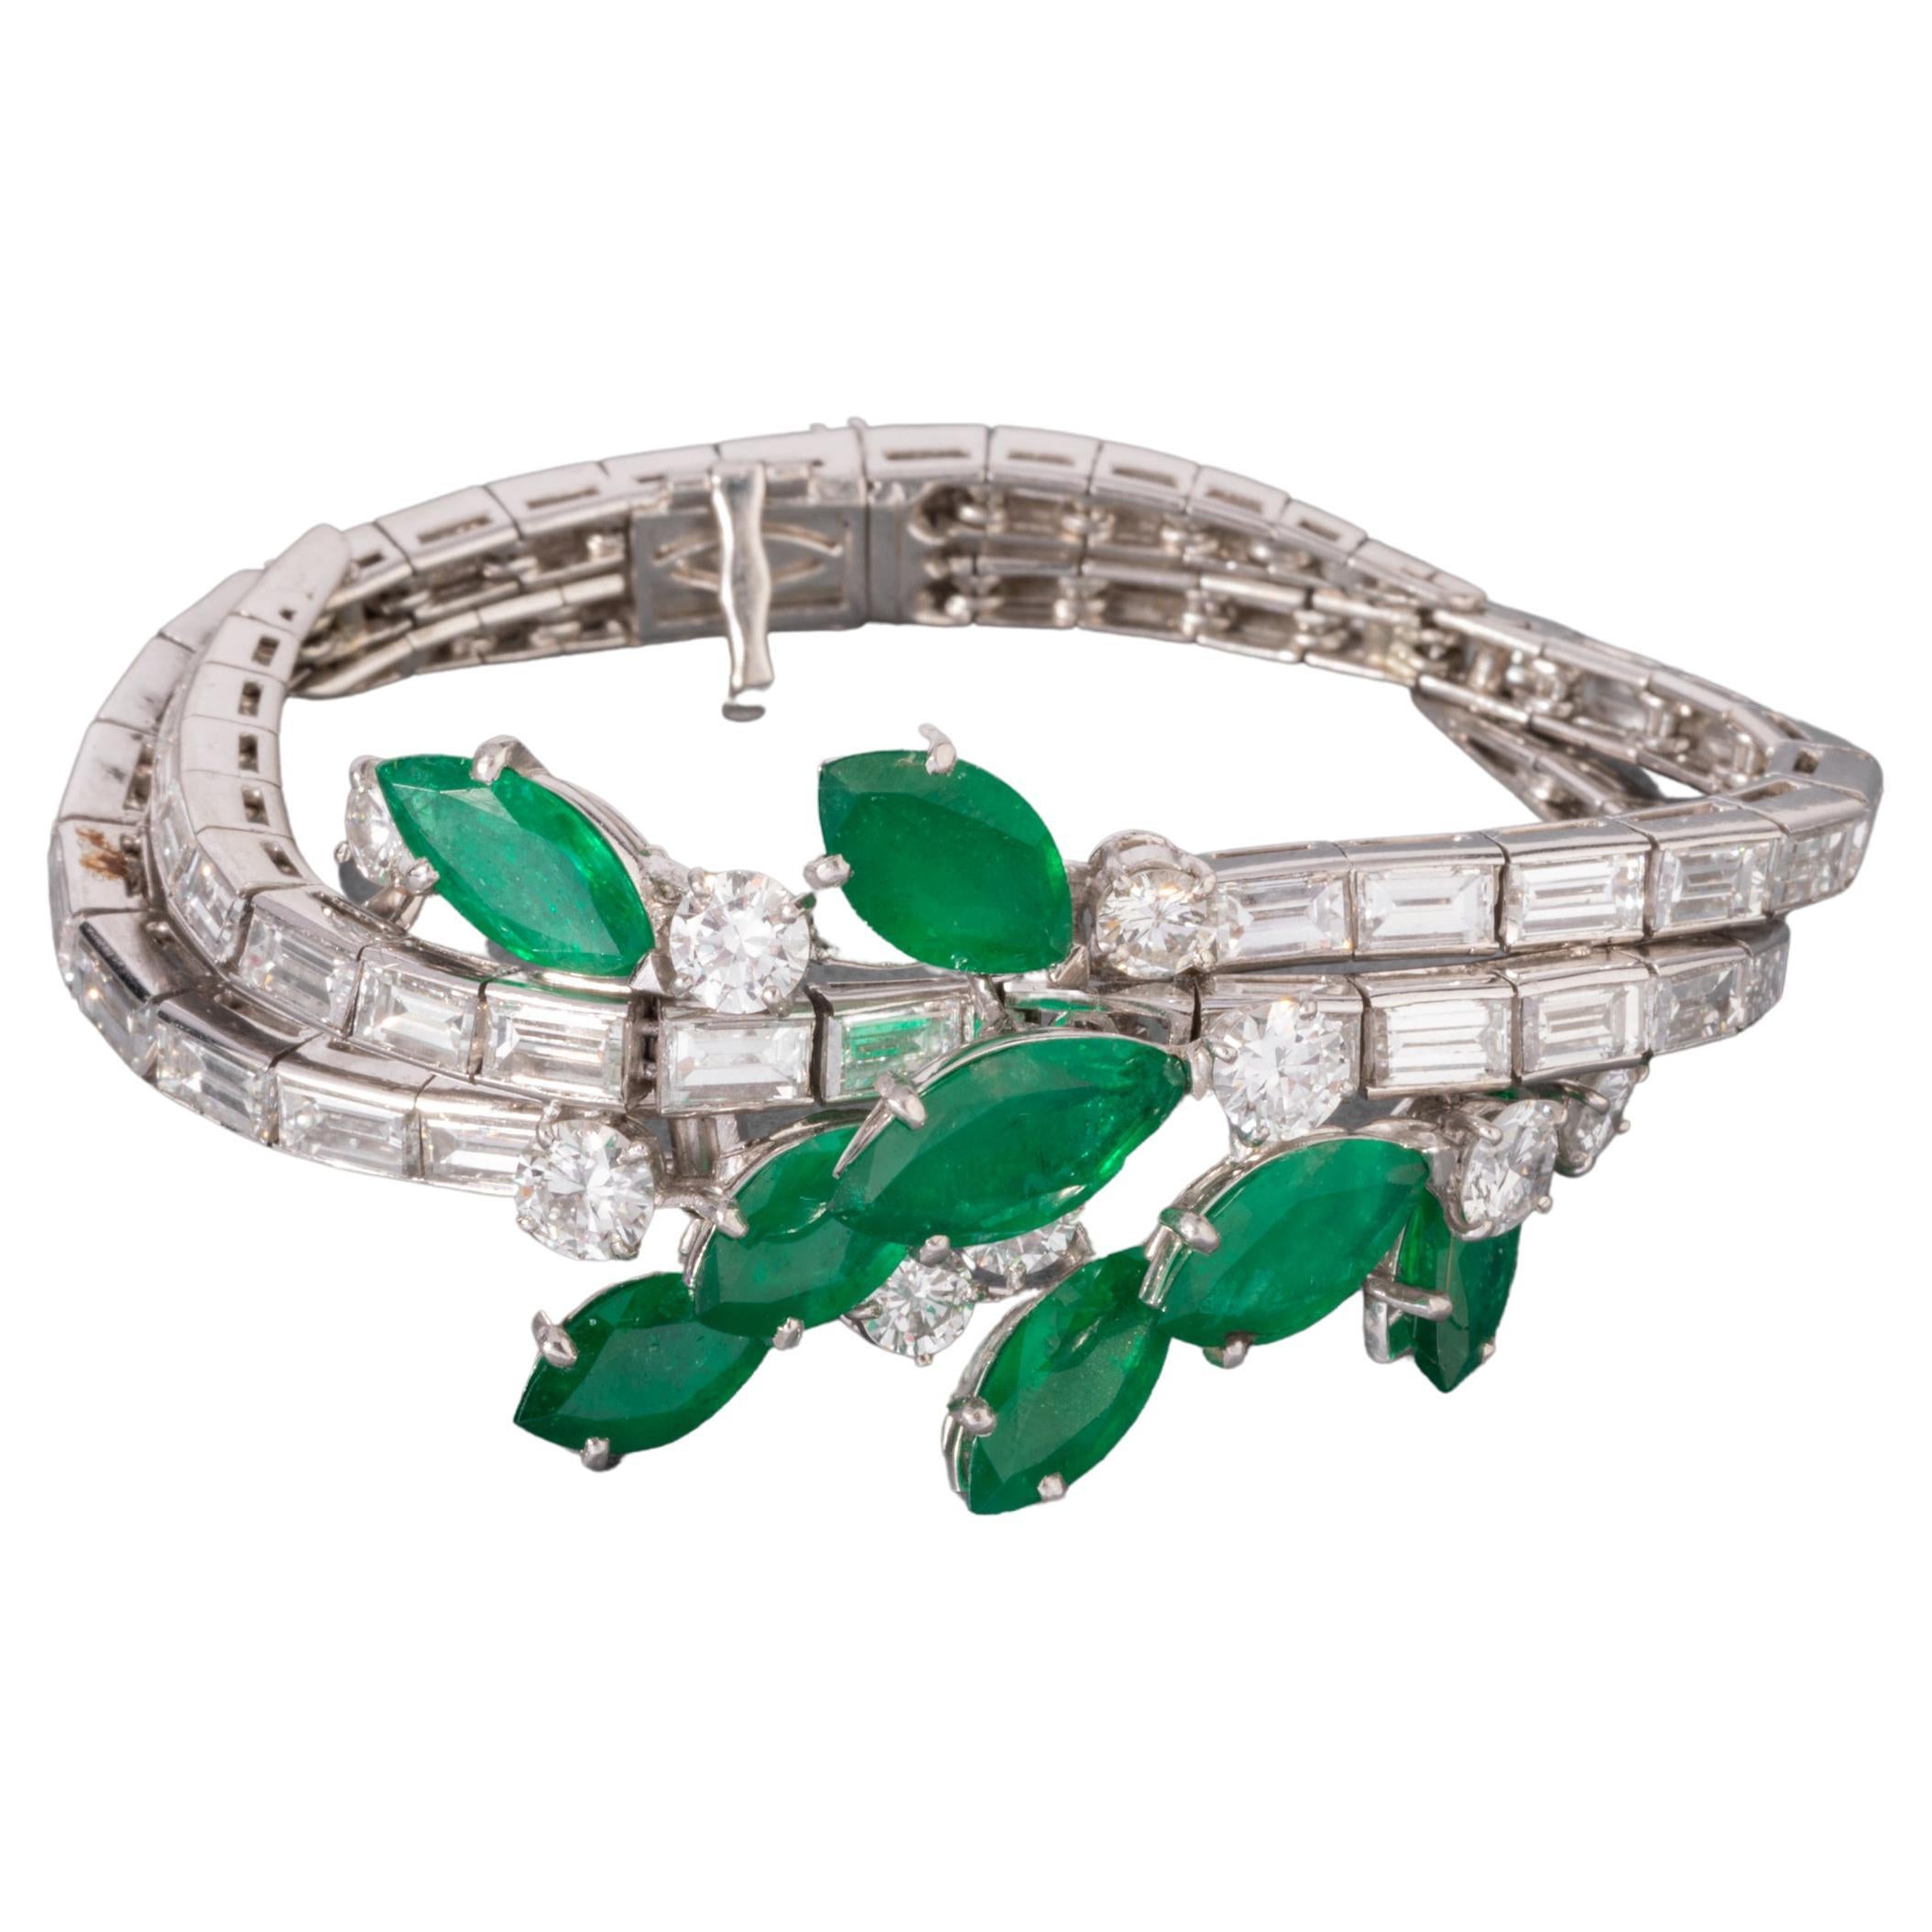 10 Carats Diamonds and 10 Carats Emeralds French Vintage Bracelet For Sale